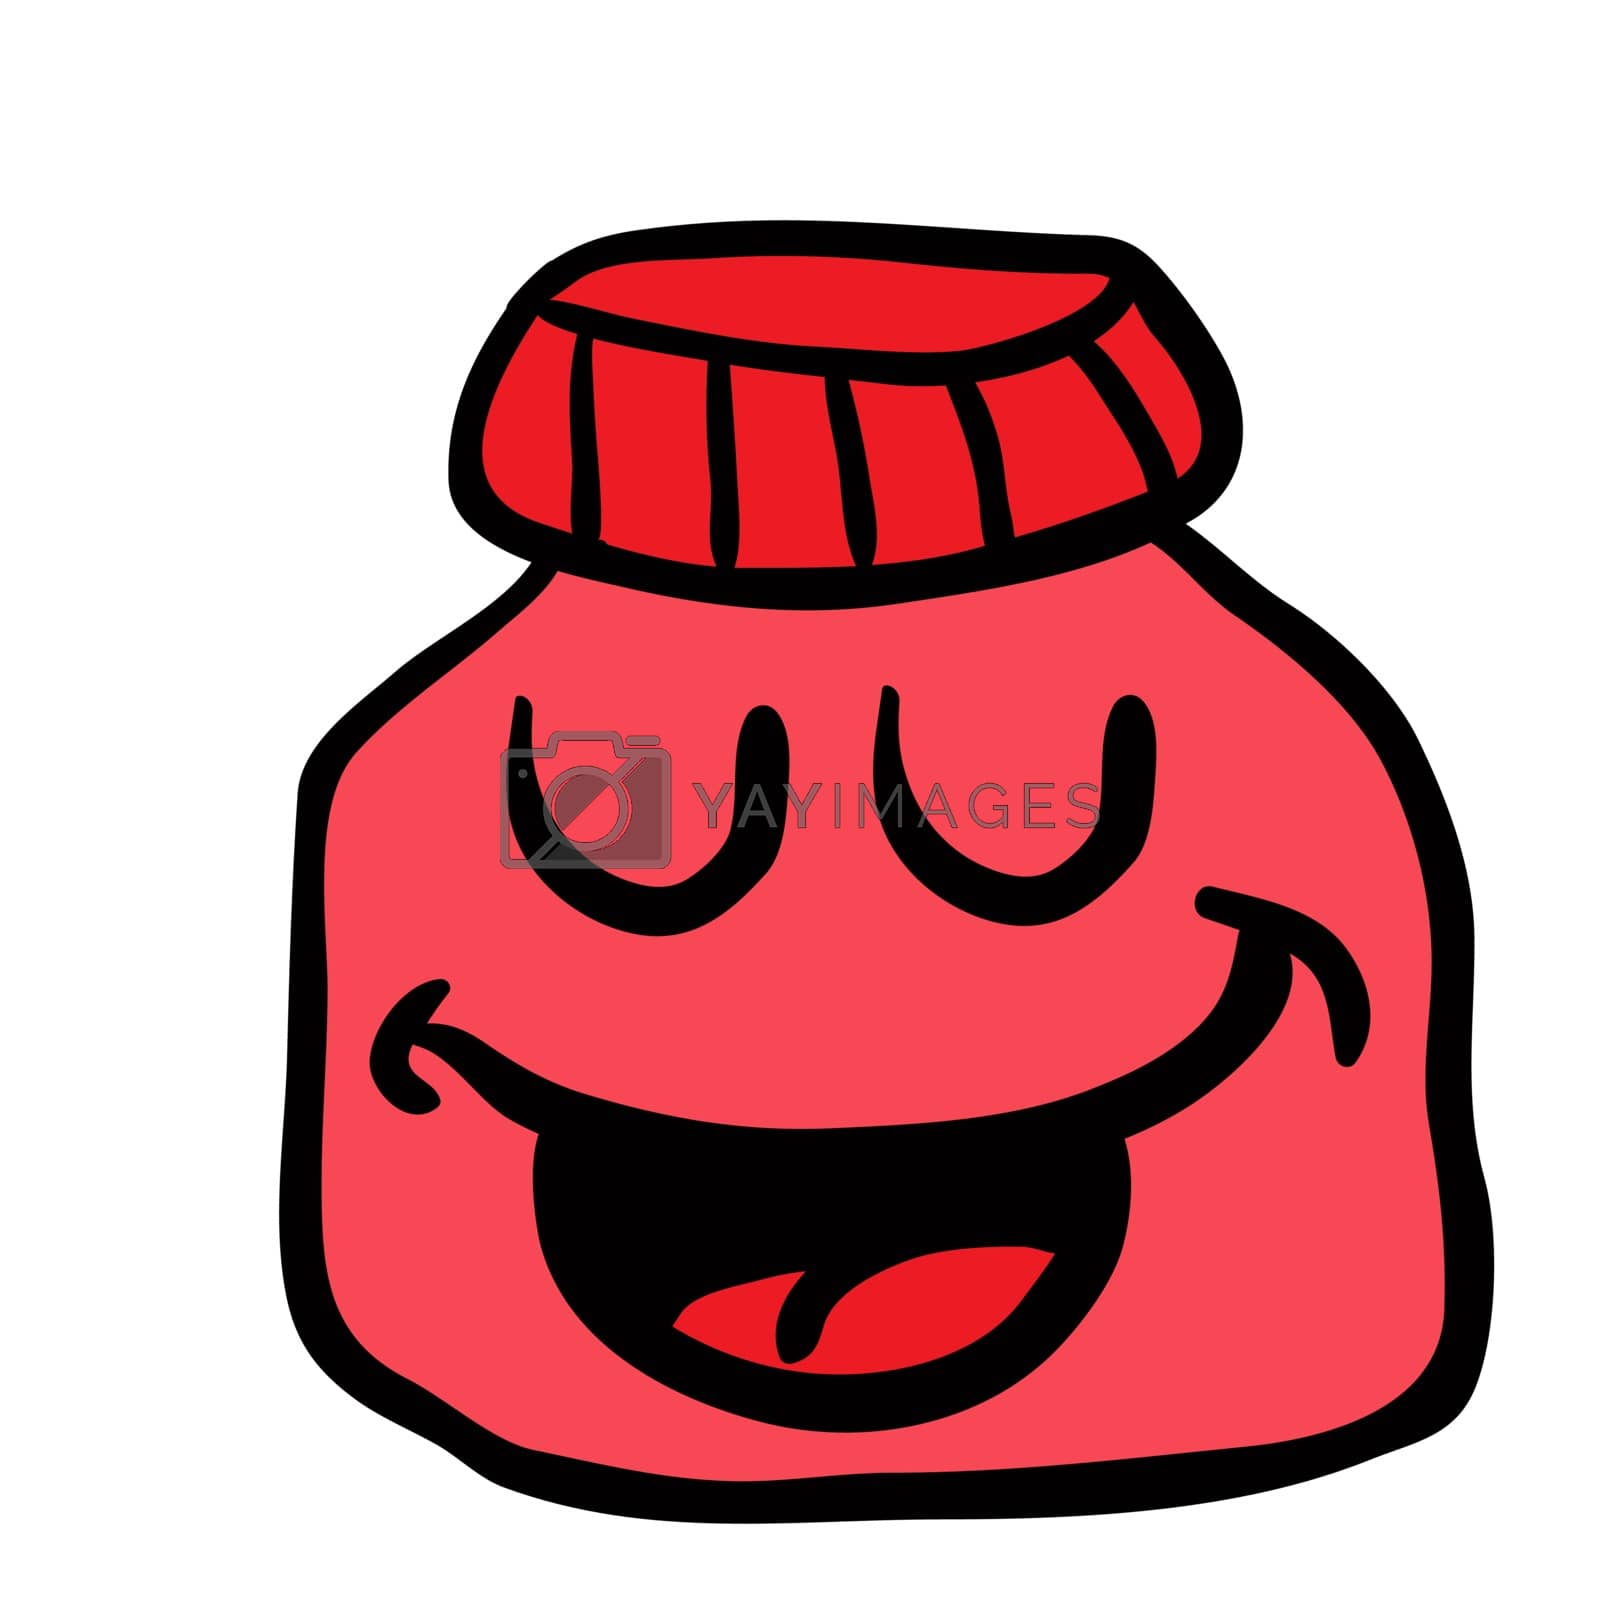 Royalty free image of happy jam jar by ainsel